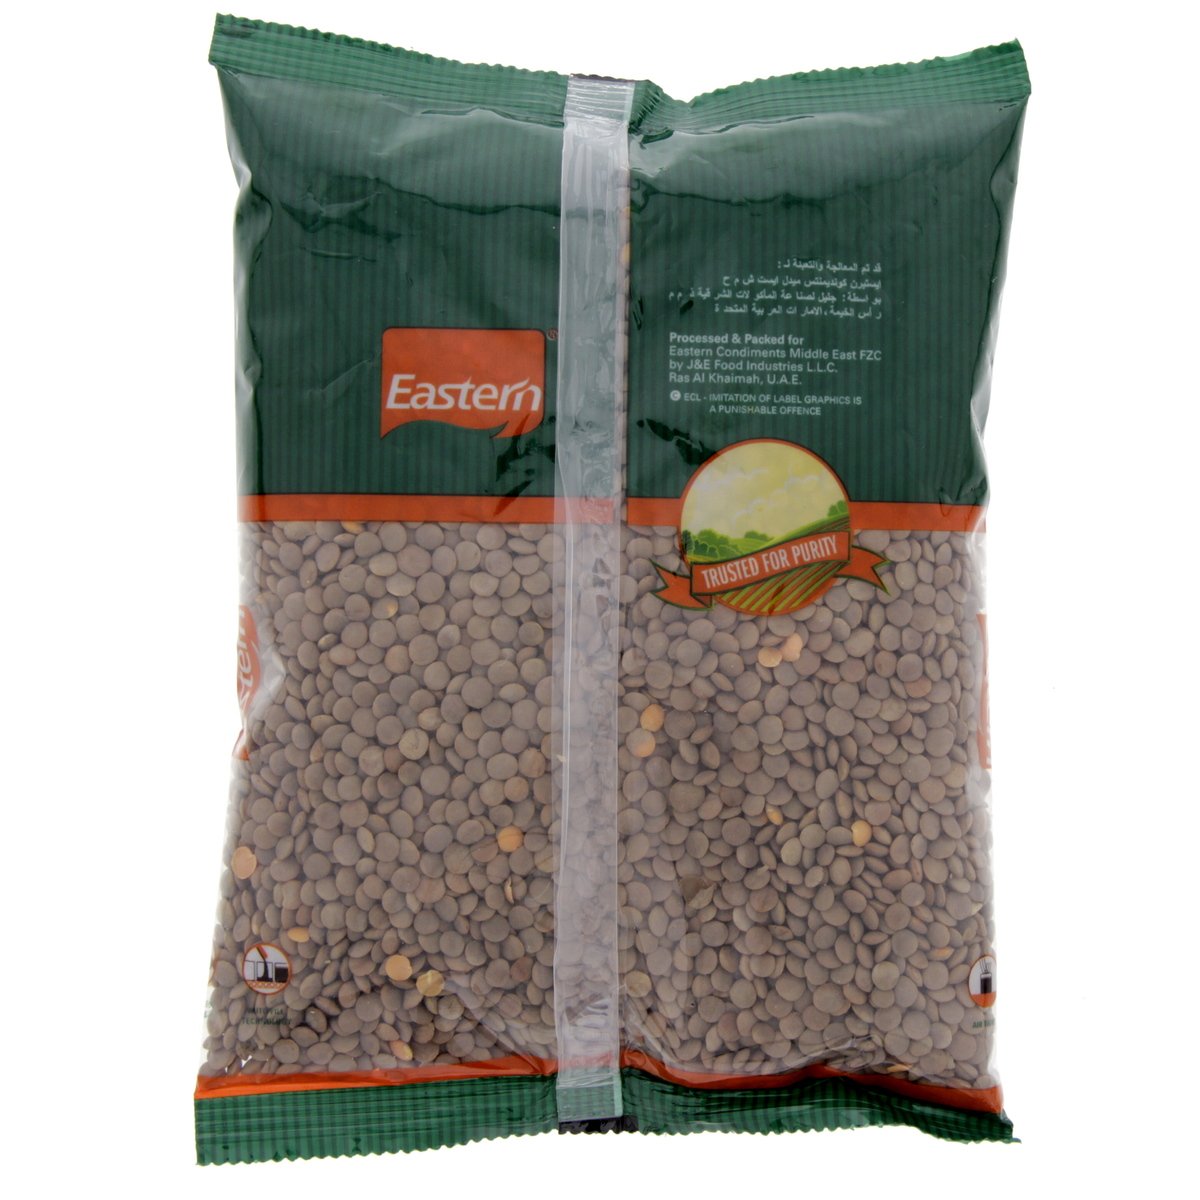 Eastern Red Masoor Whole 500 g